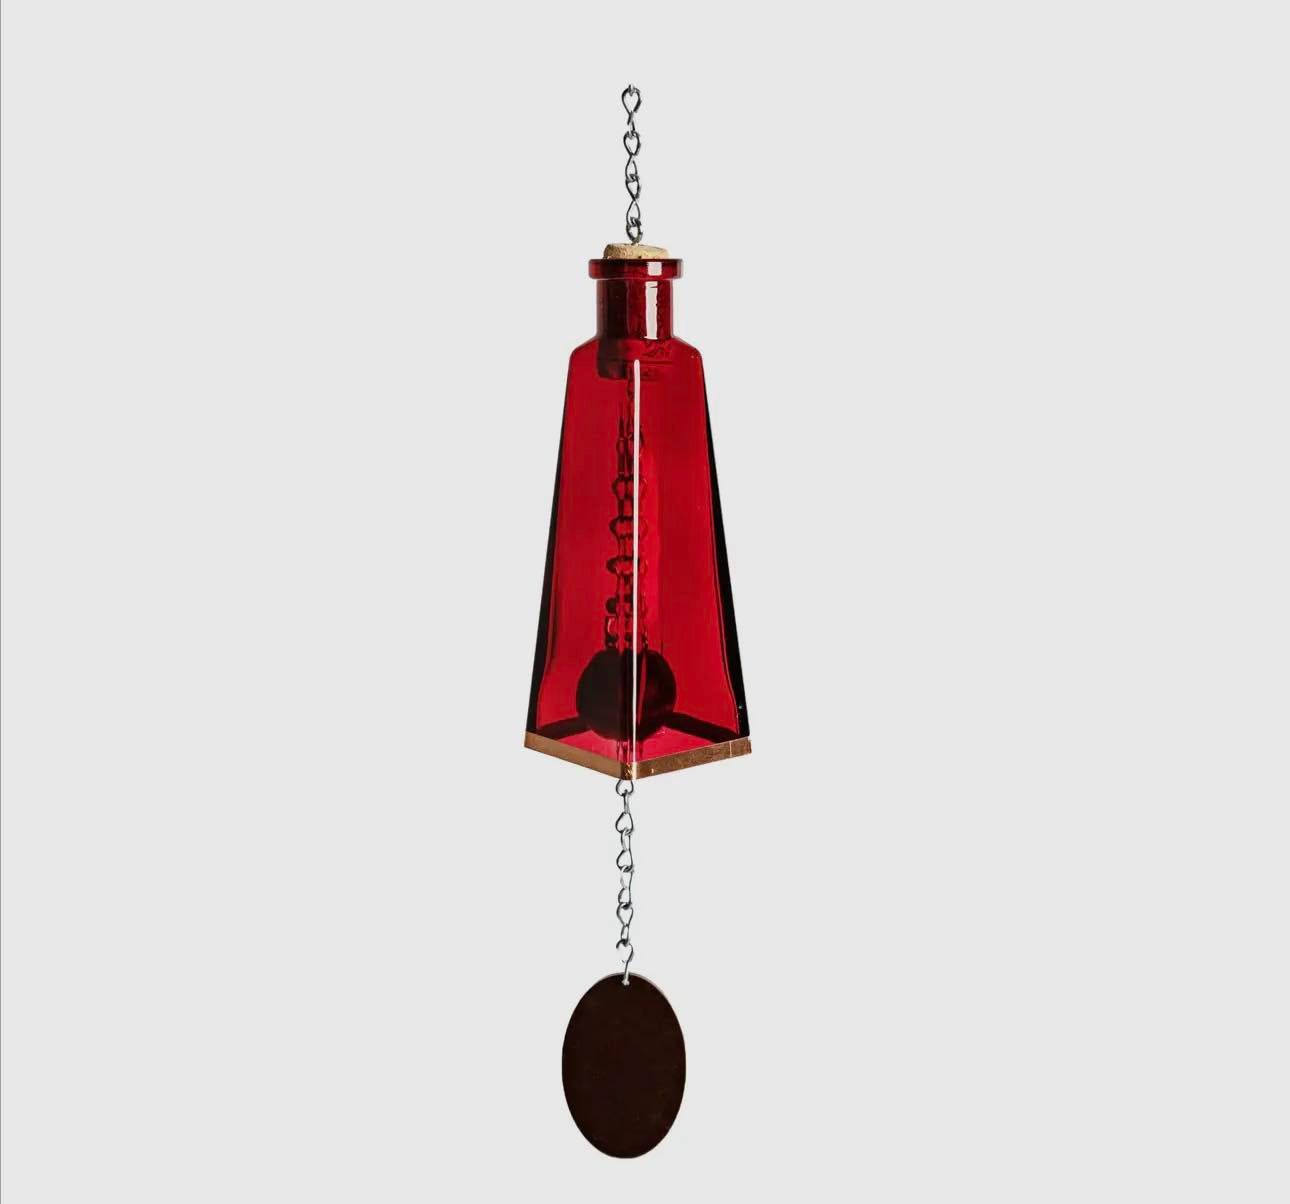 Glass Pyramid-Shaped Bottle Wind Chimes